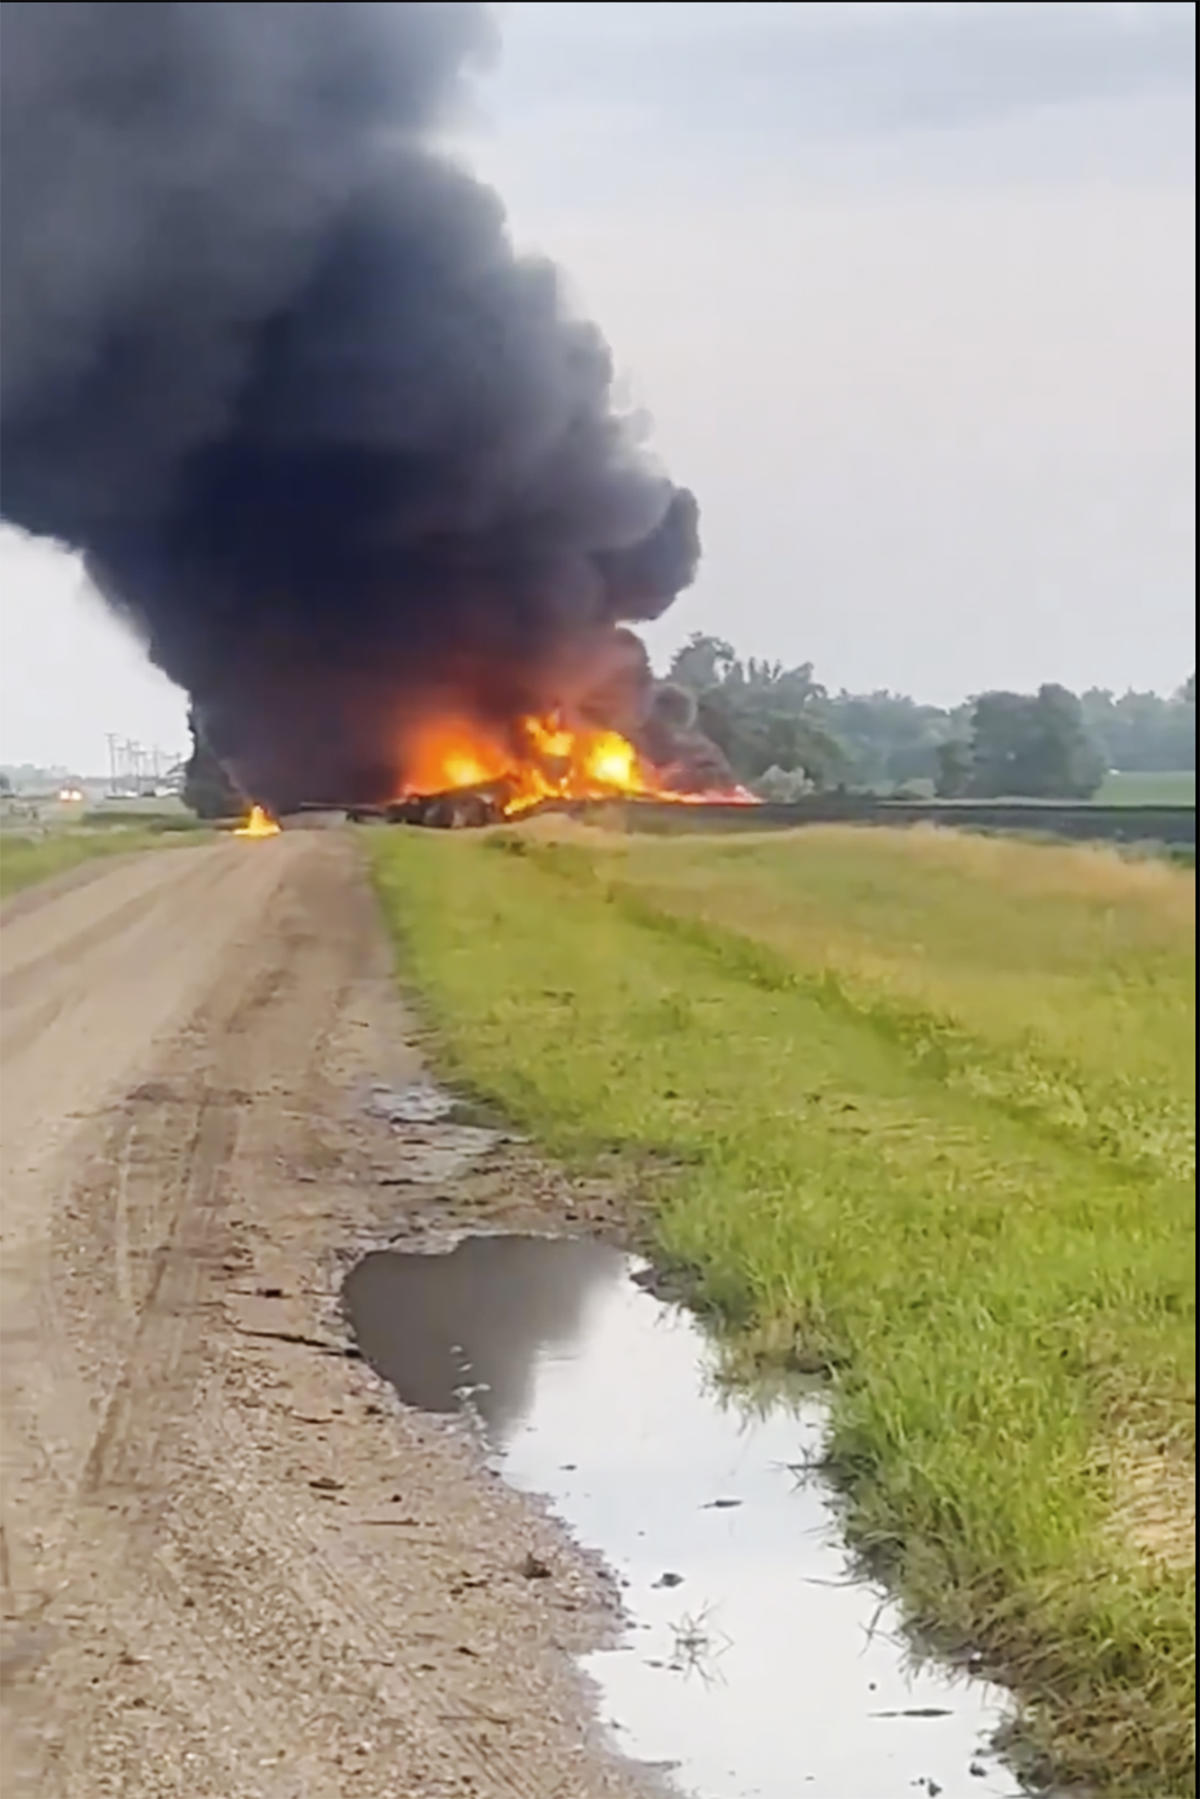 Shelter-in-place order briefly issued at North Dakota derailment site, officials say